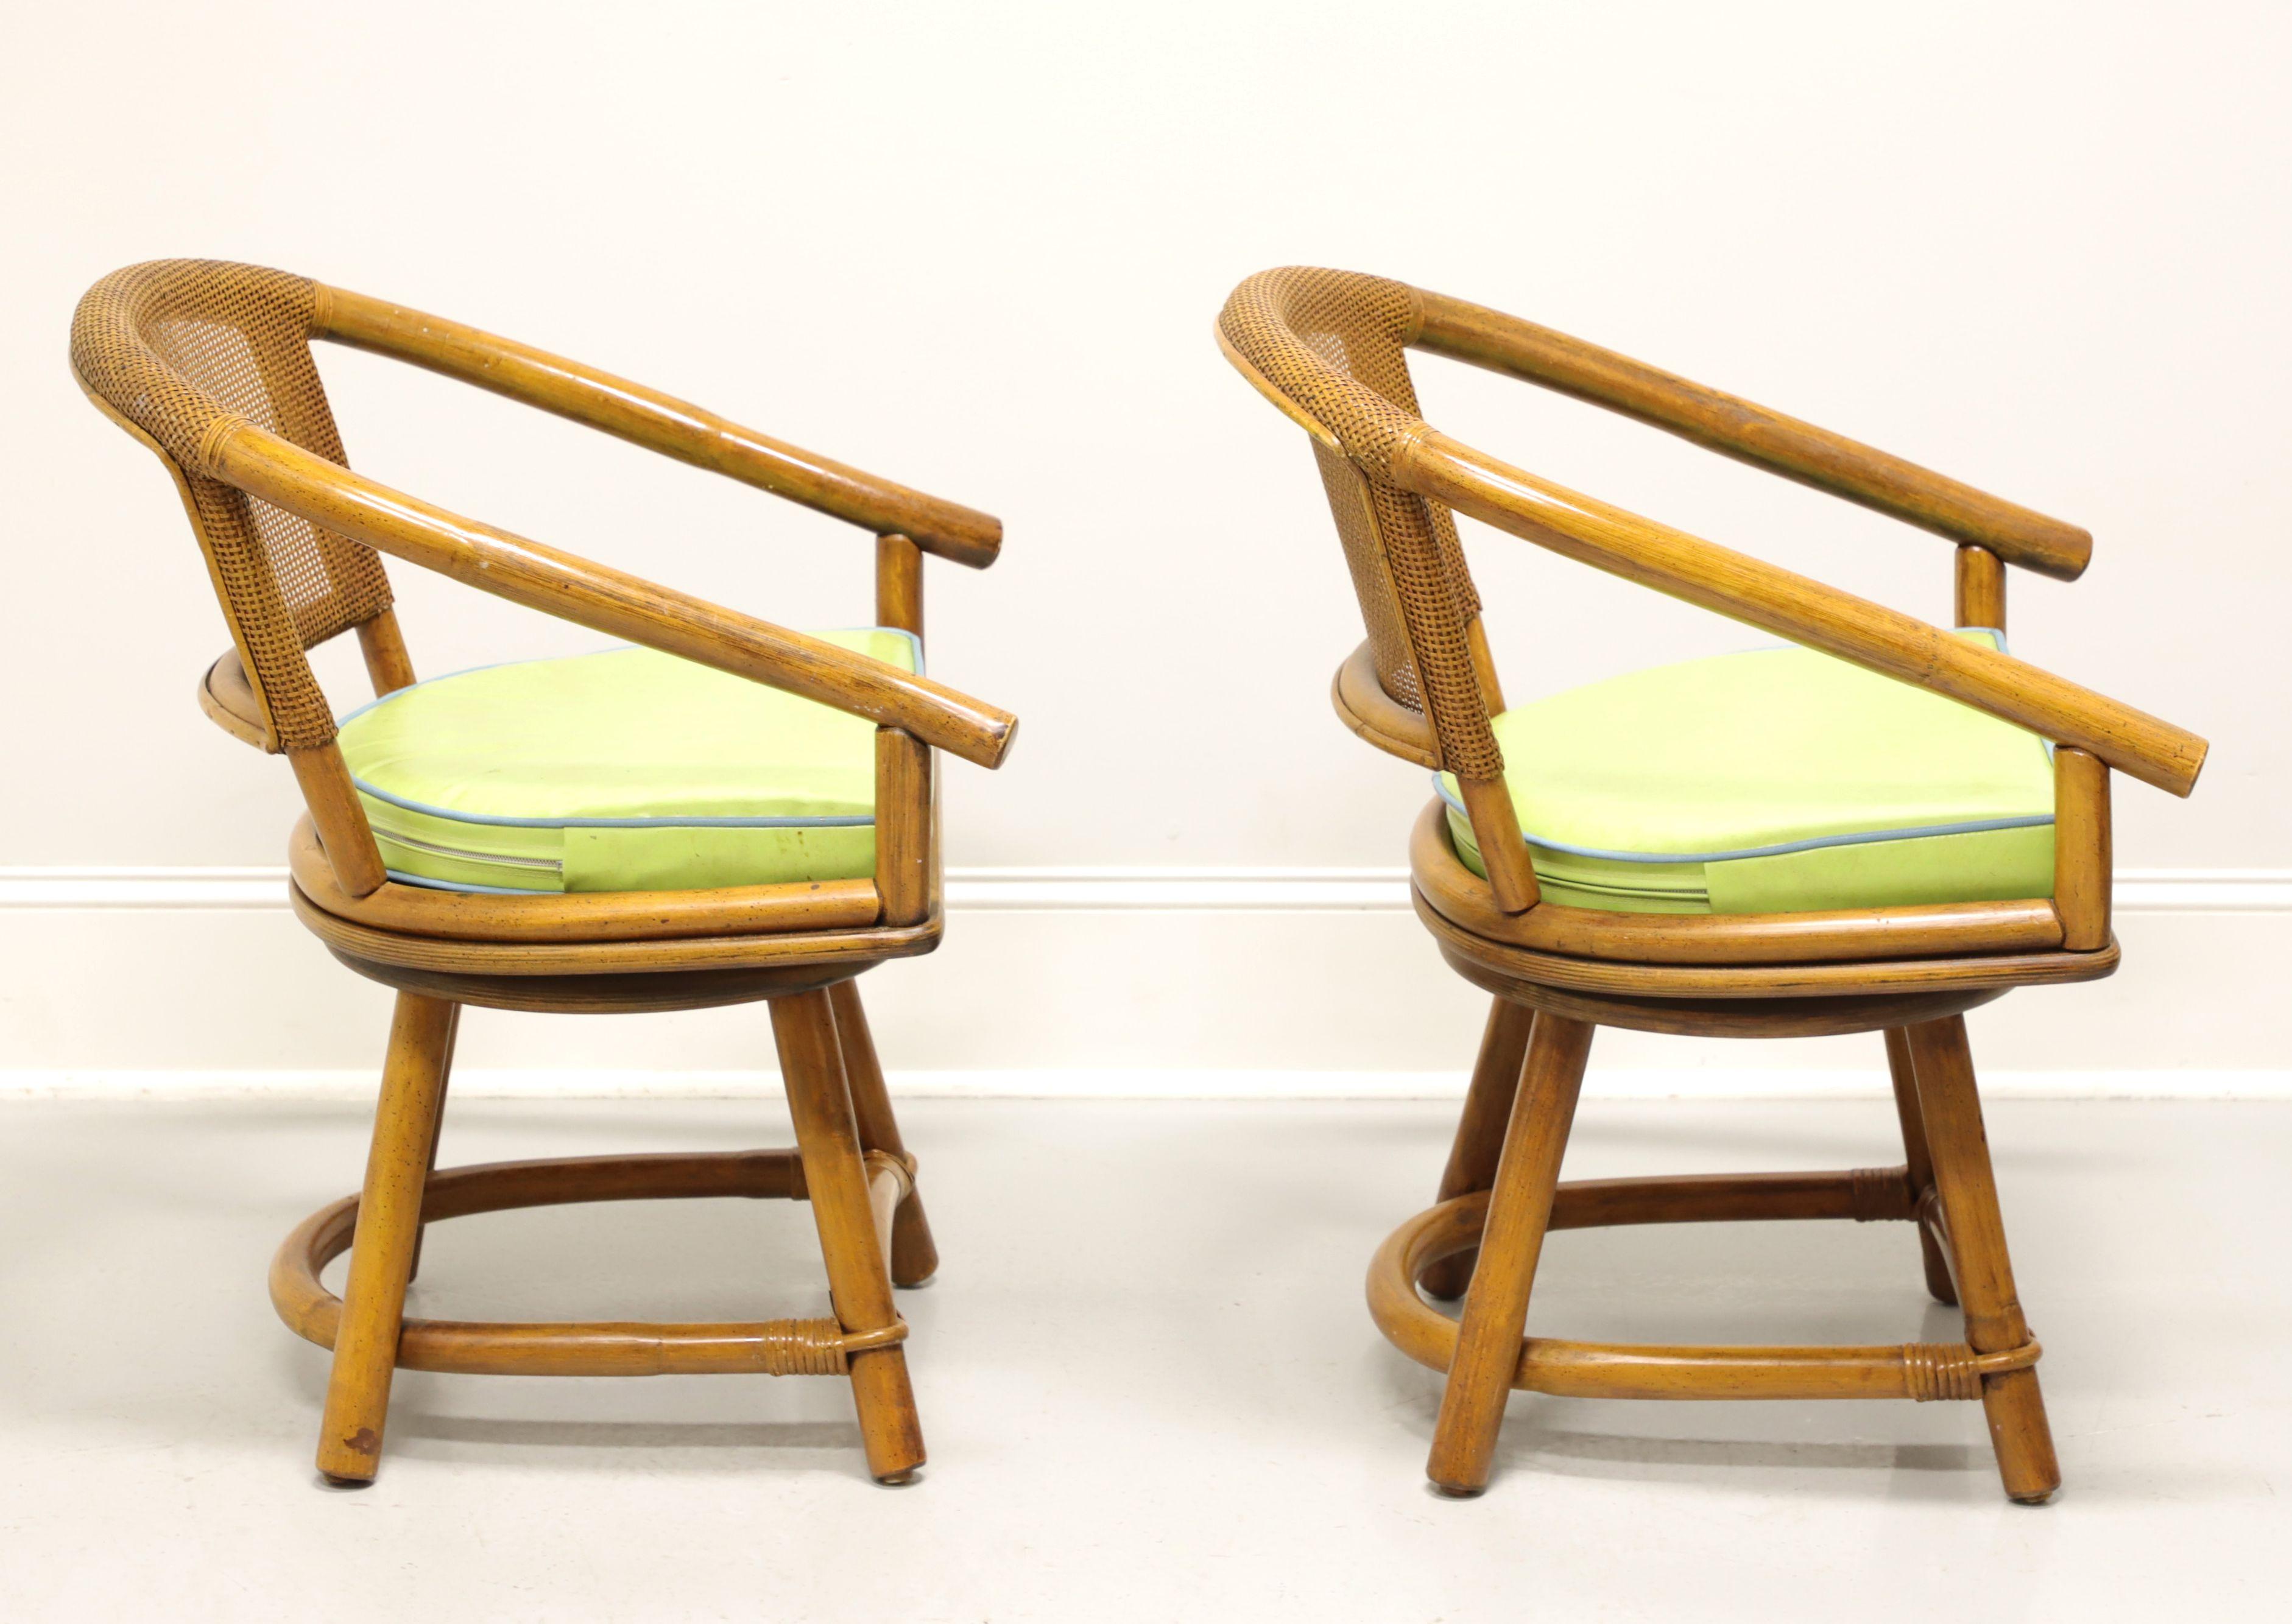 American FICKS REED Mid 20th Century Faux Bamboo Rattan Swivel Chairs - Pair C